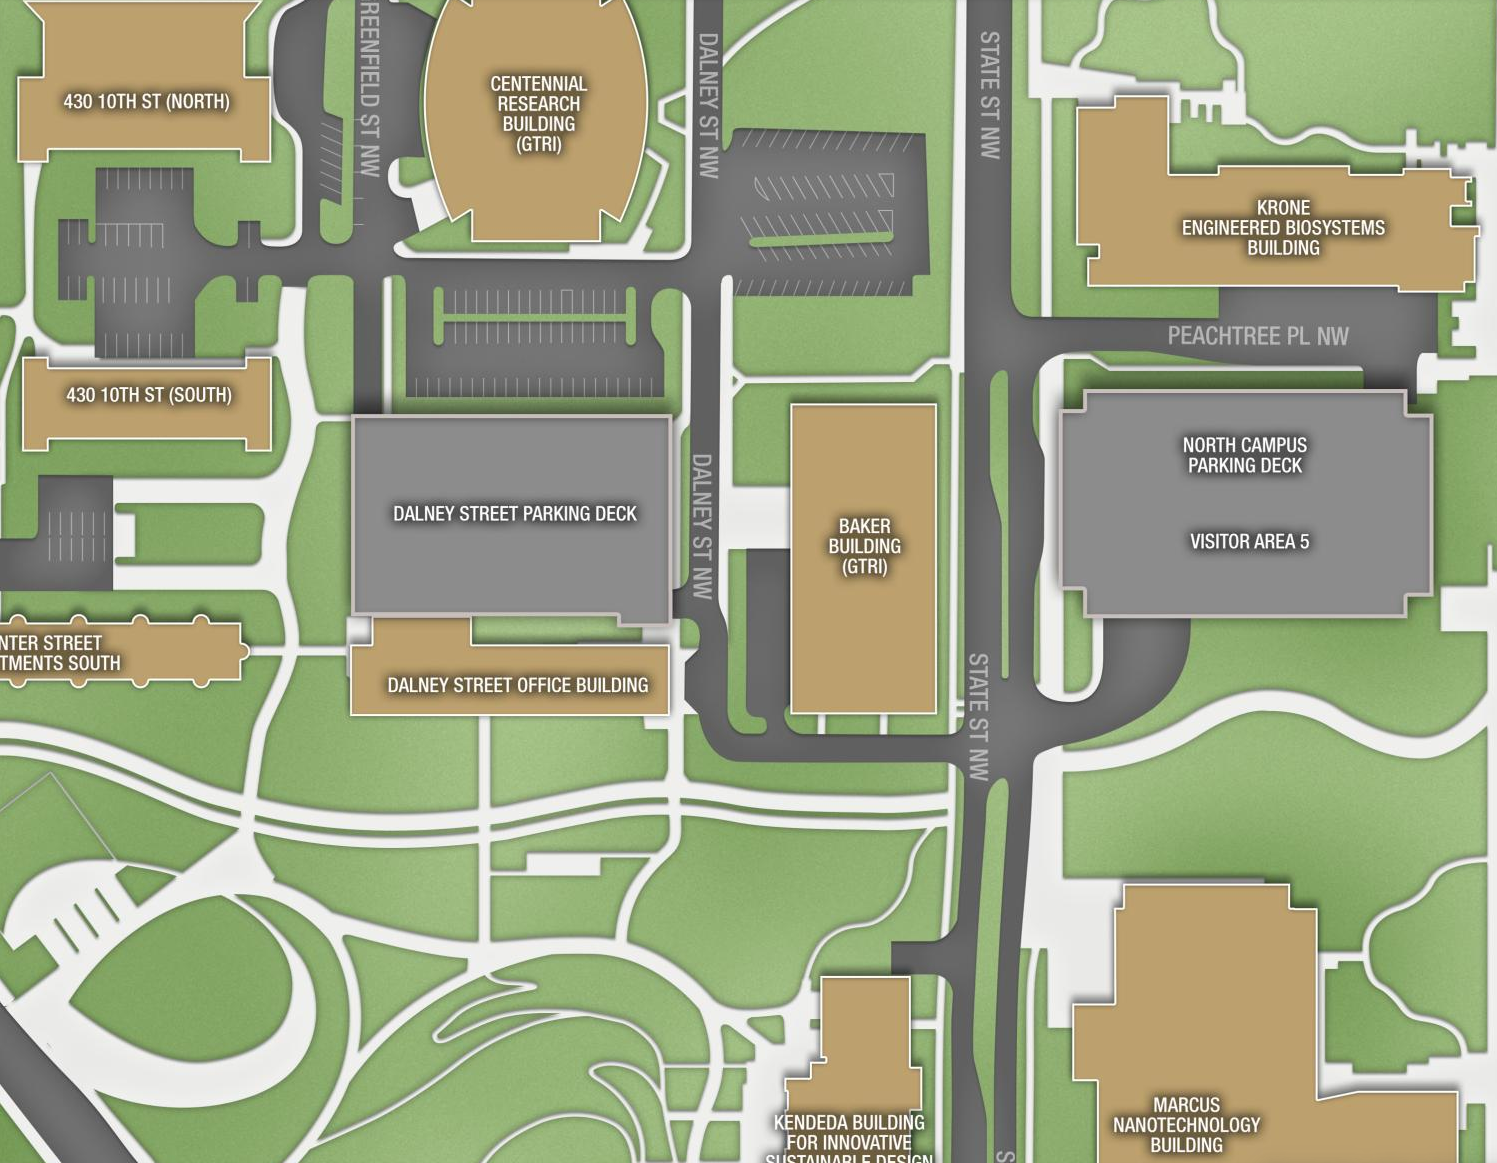 screenshot fo the Dalney building campus map